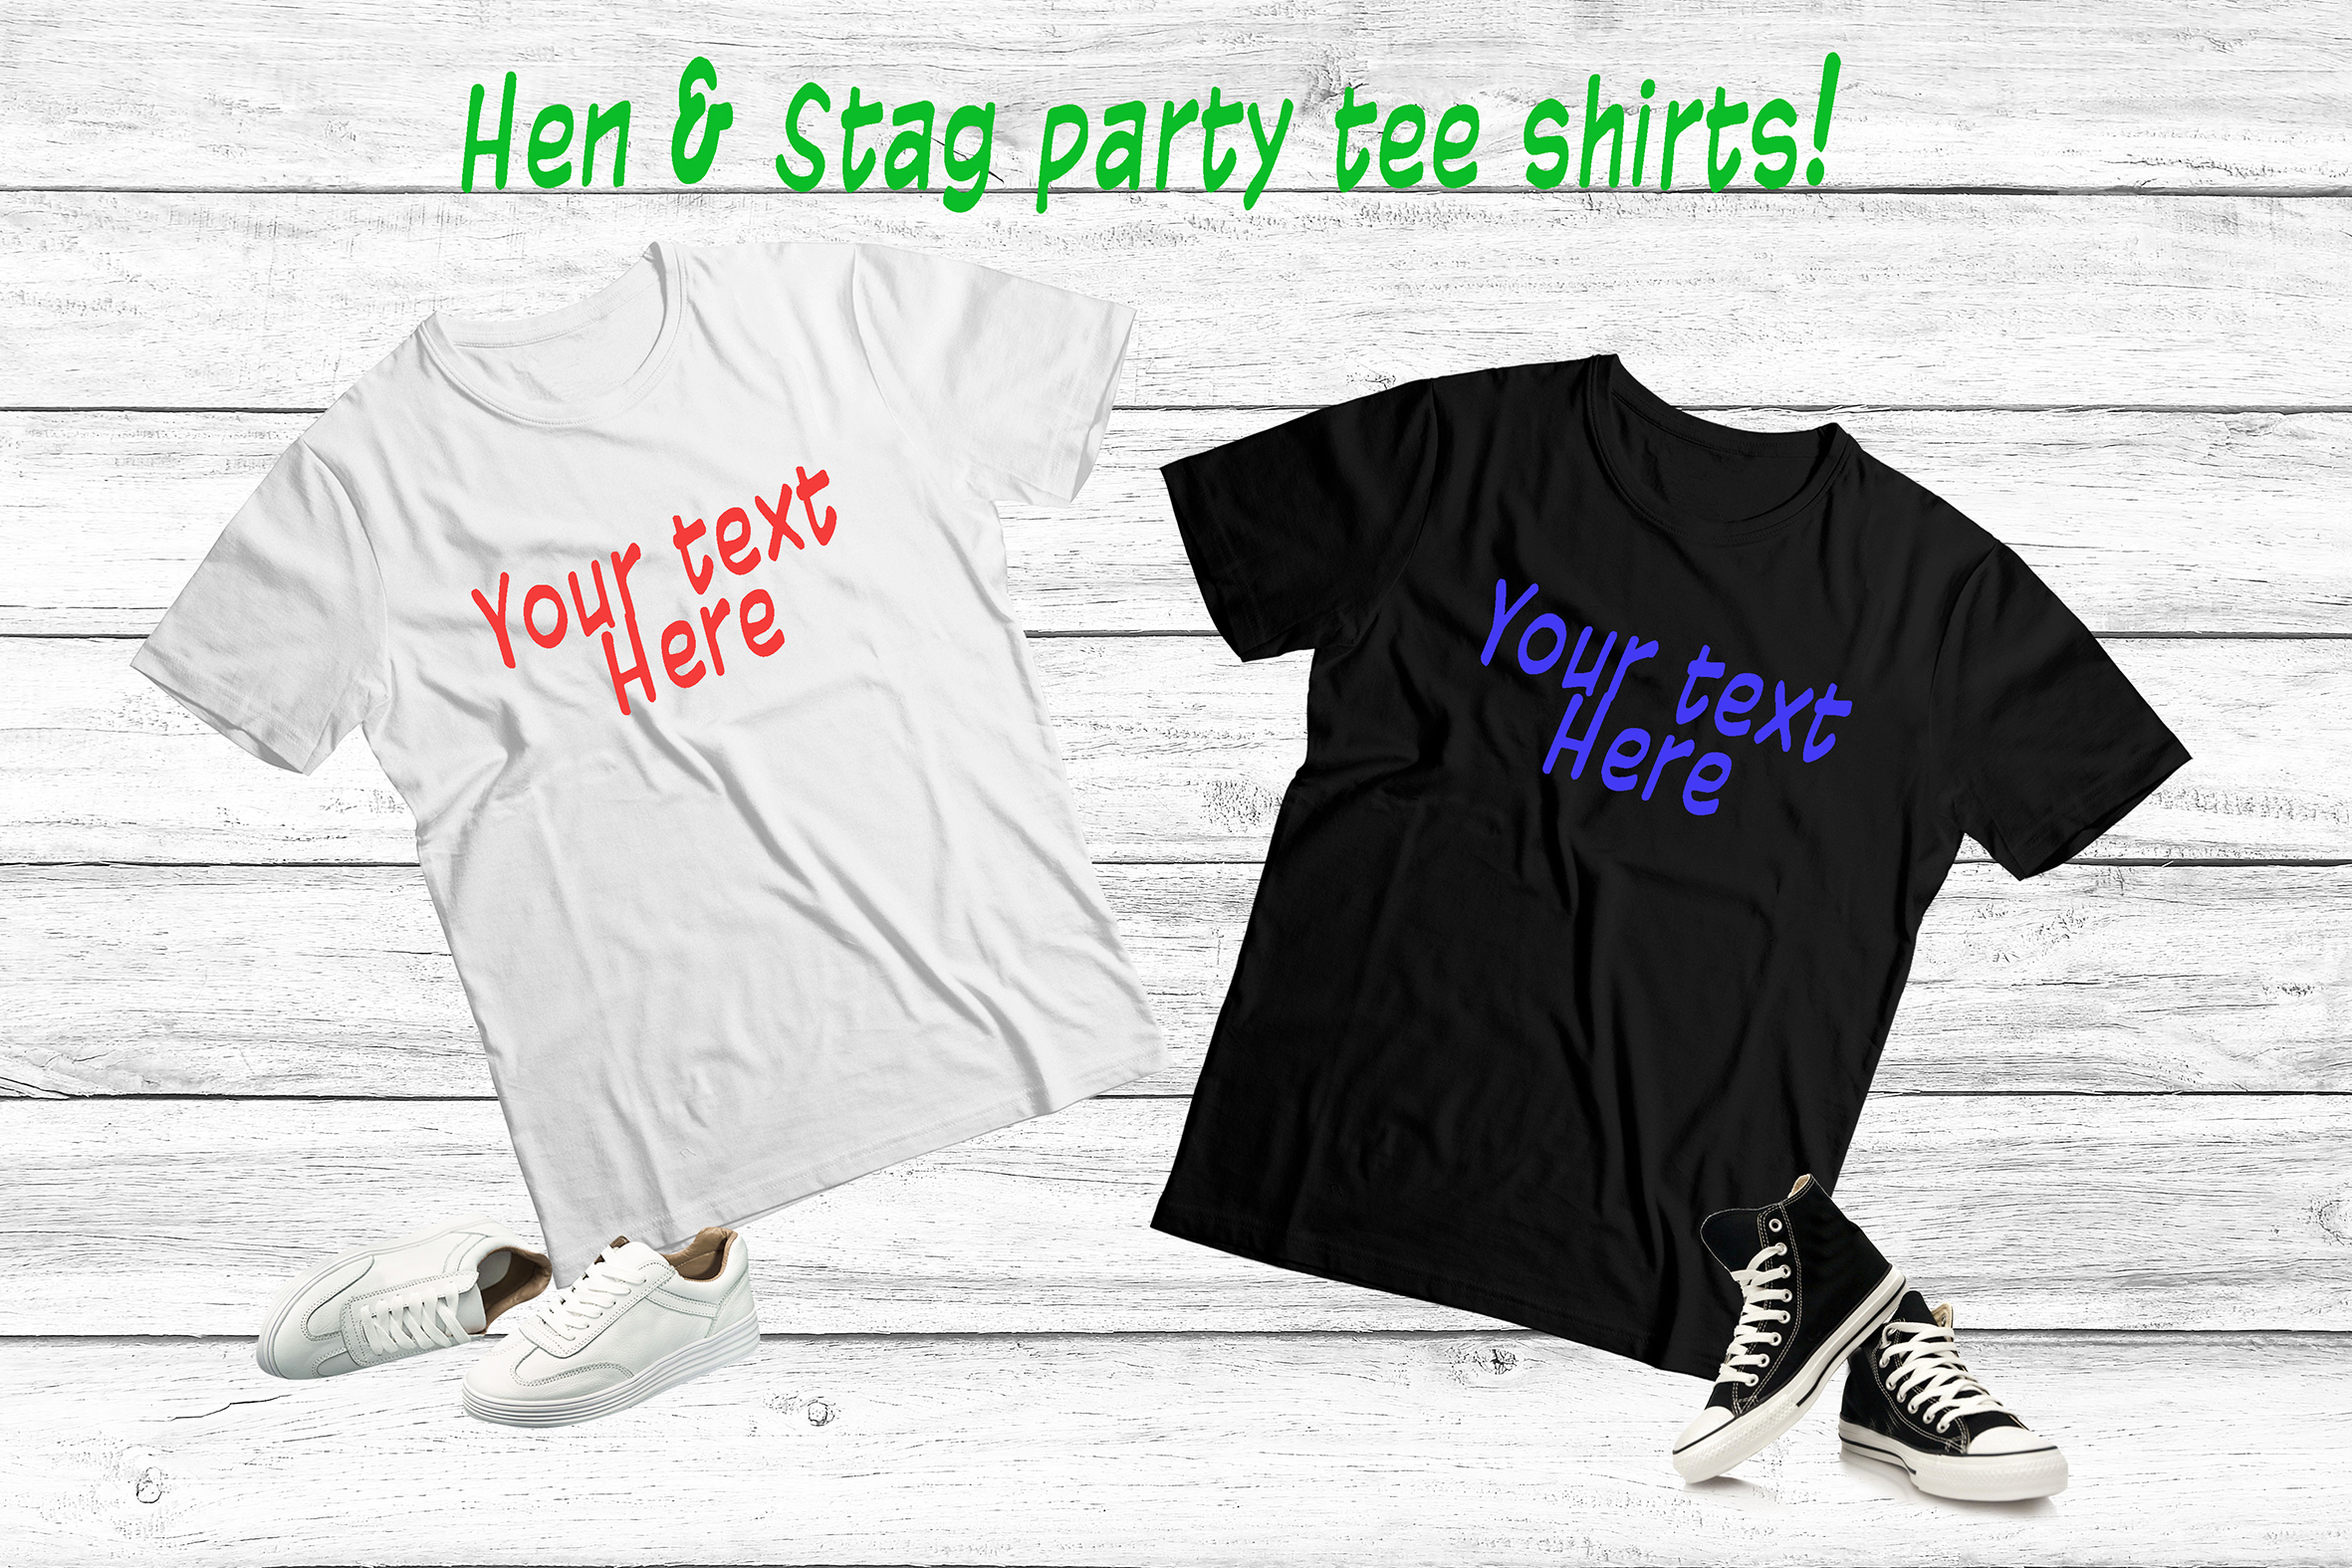 Custom printed Hen and Stag tee shirts